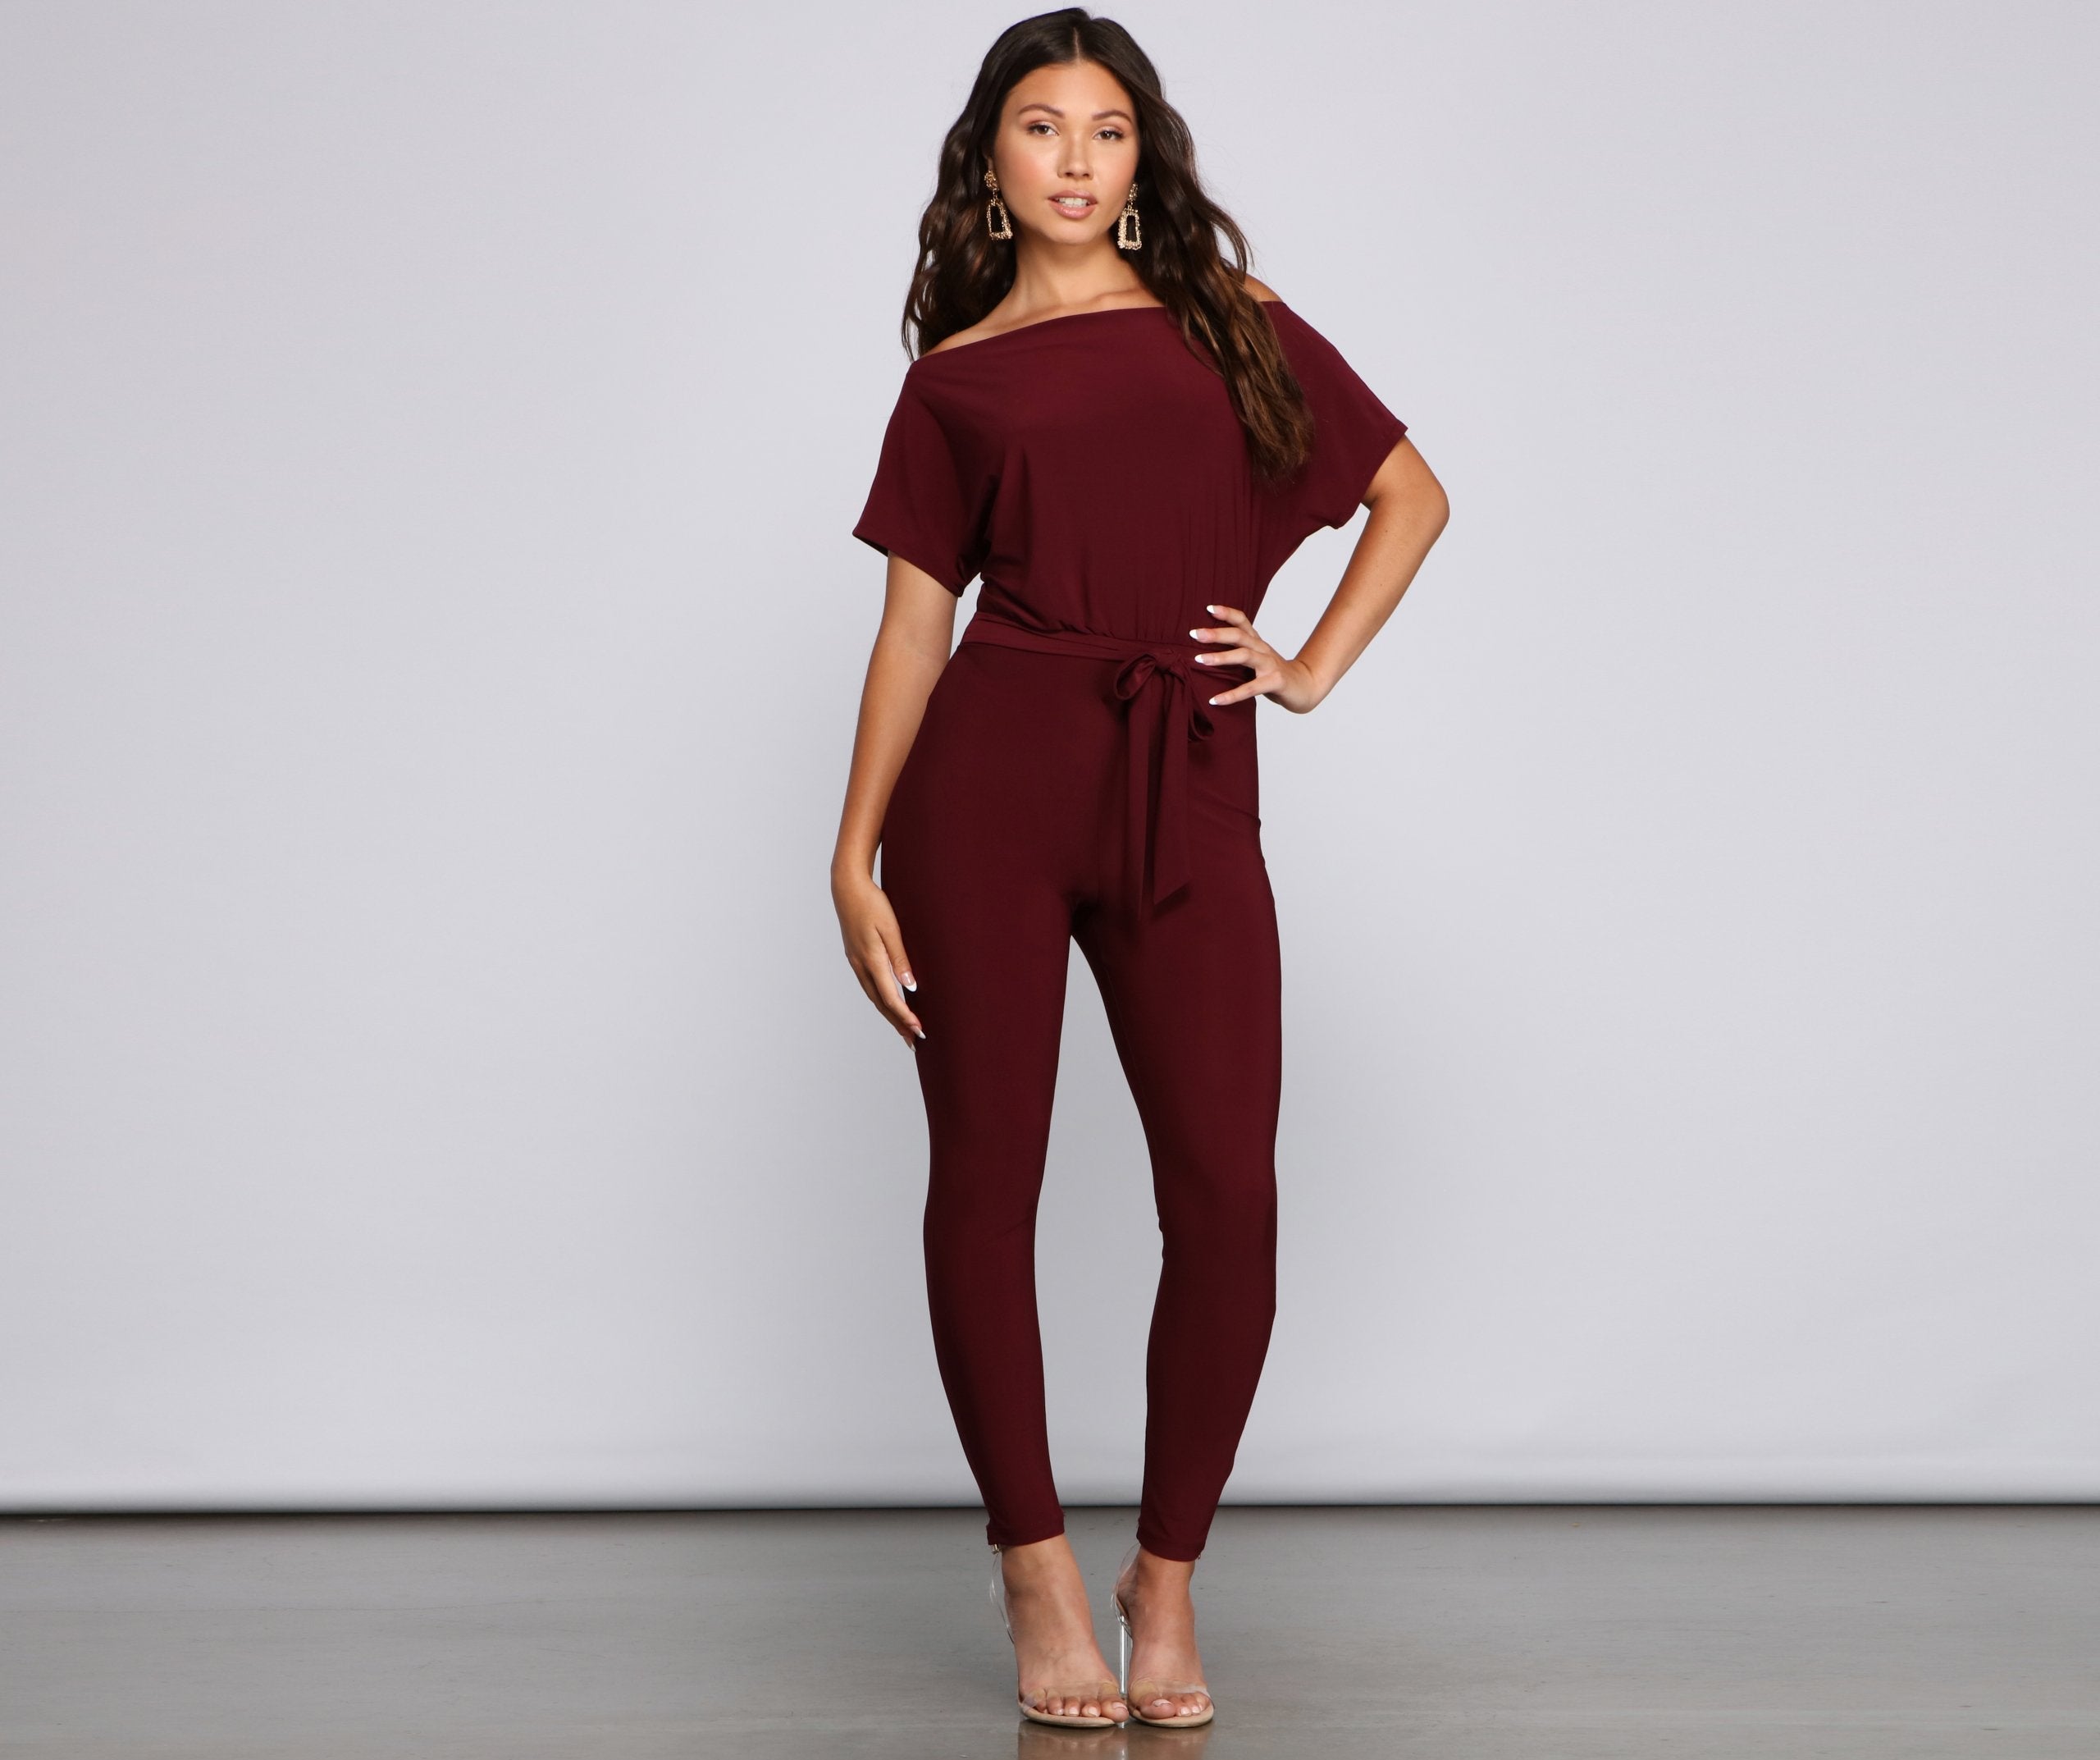 Chill Out Boat Neck Catsuit Sai Feel